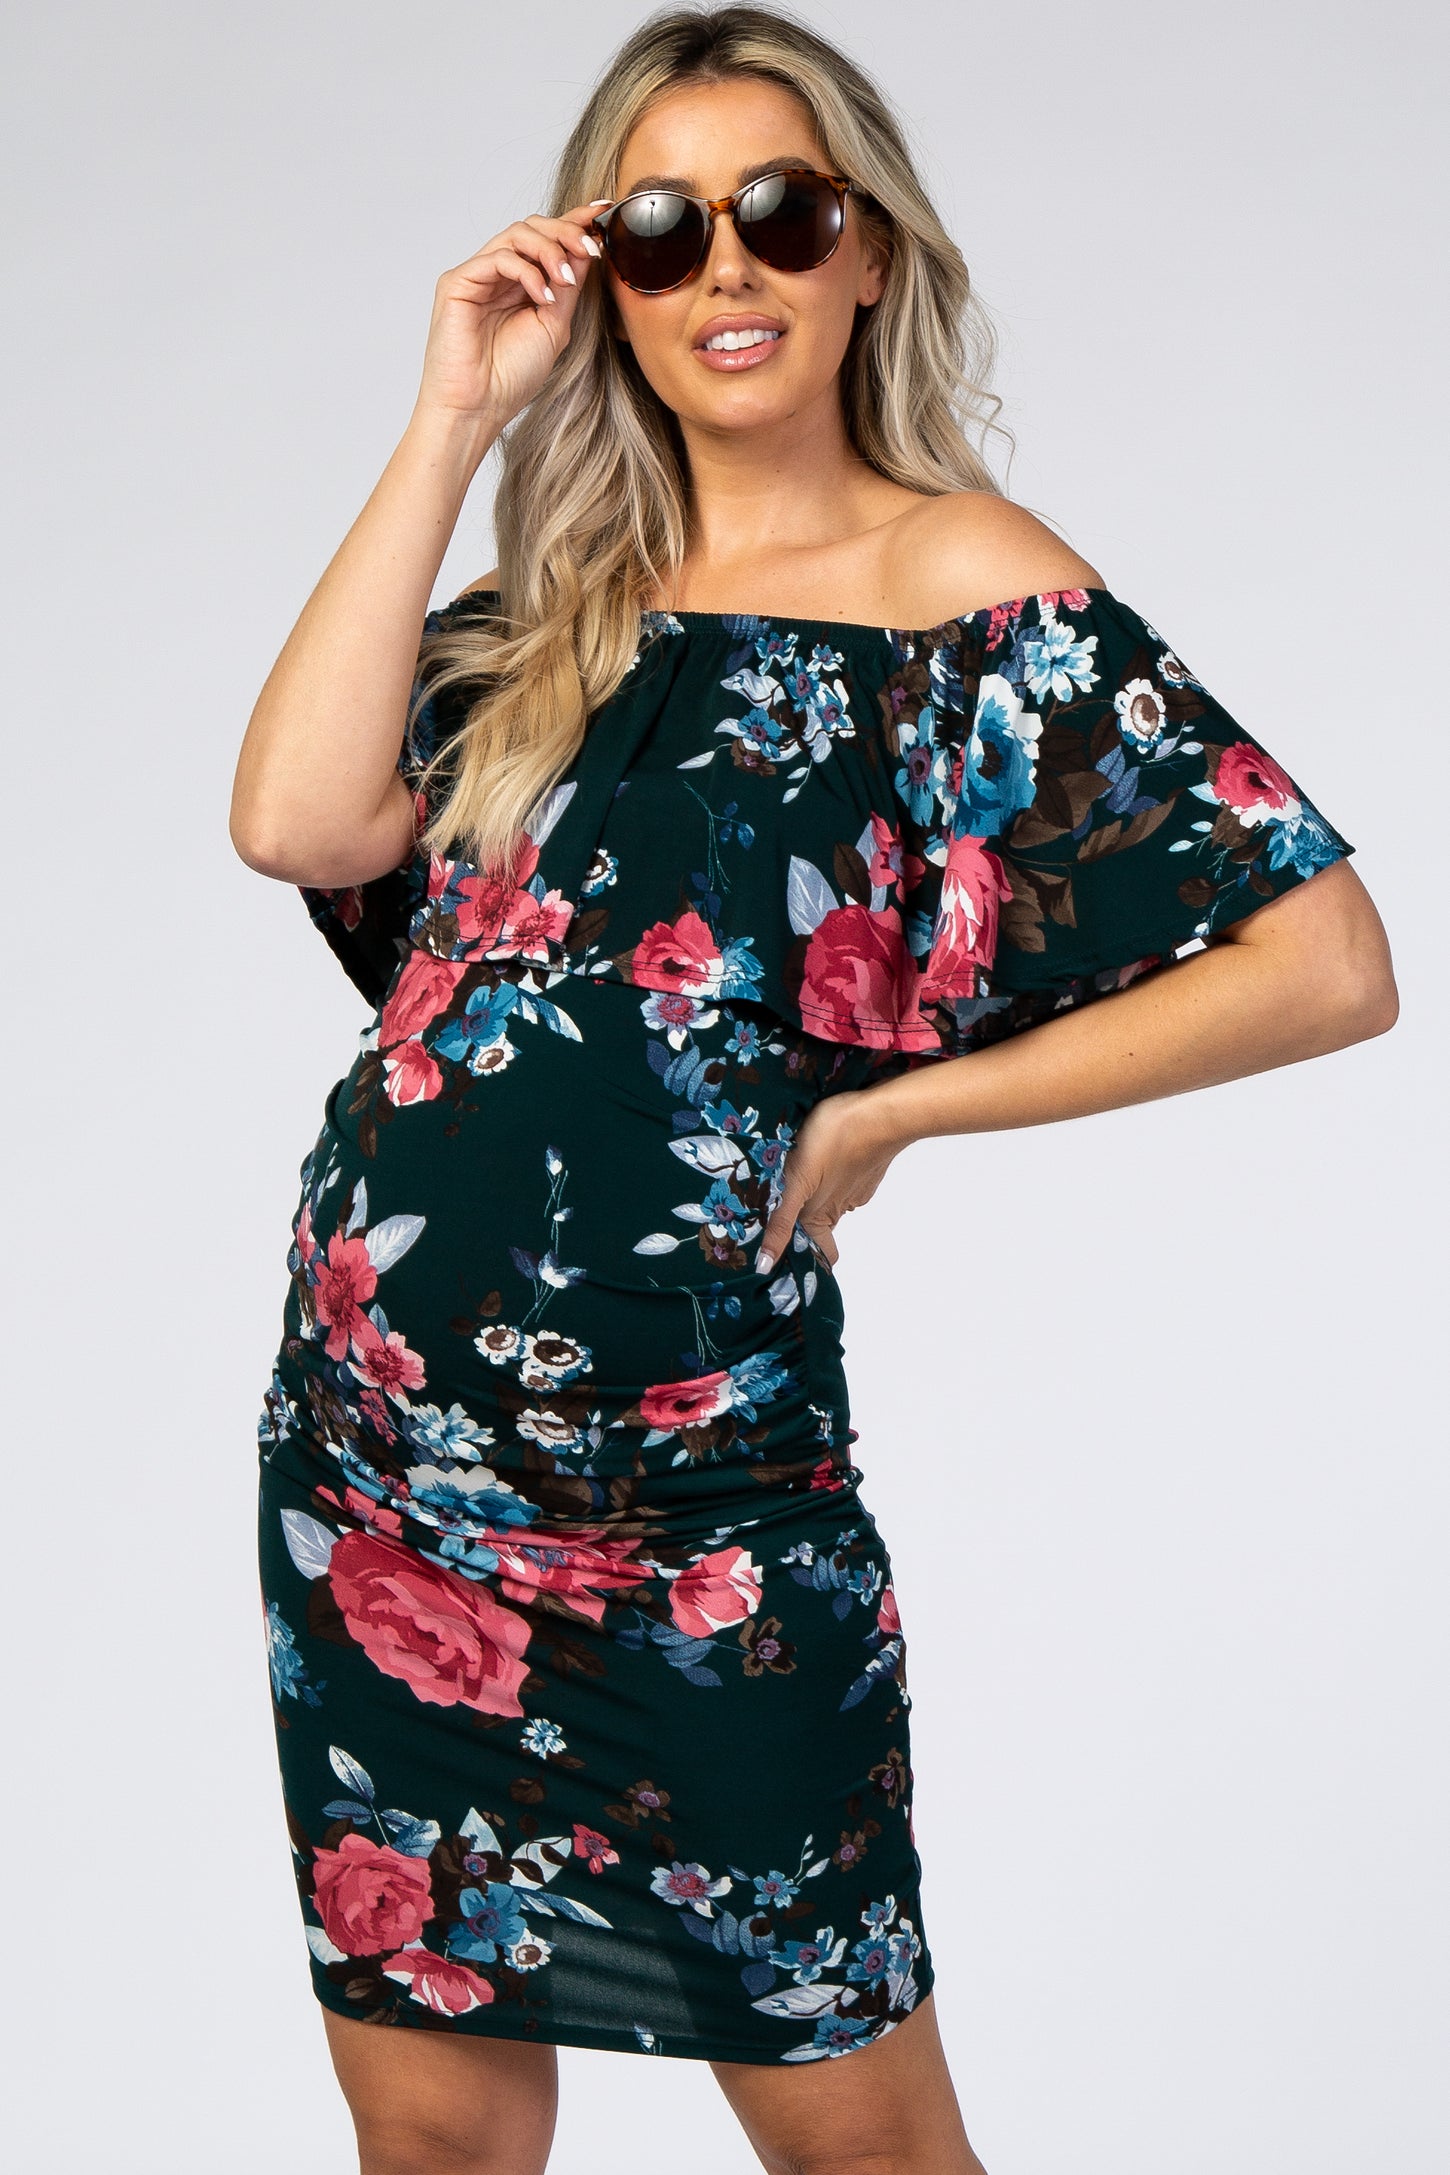 Teal Floral Ruffle Off Shoulder Fitted Maternity Dress